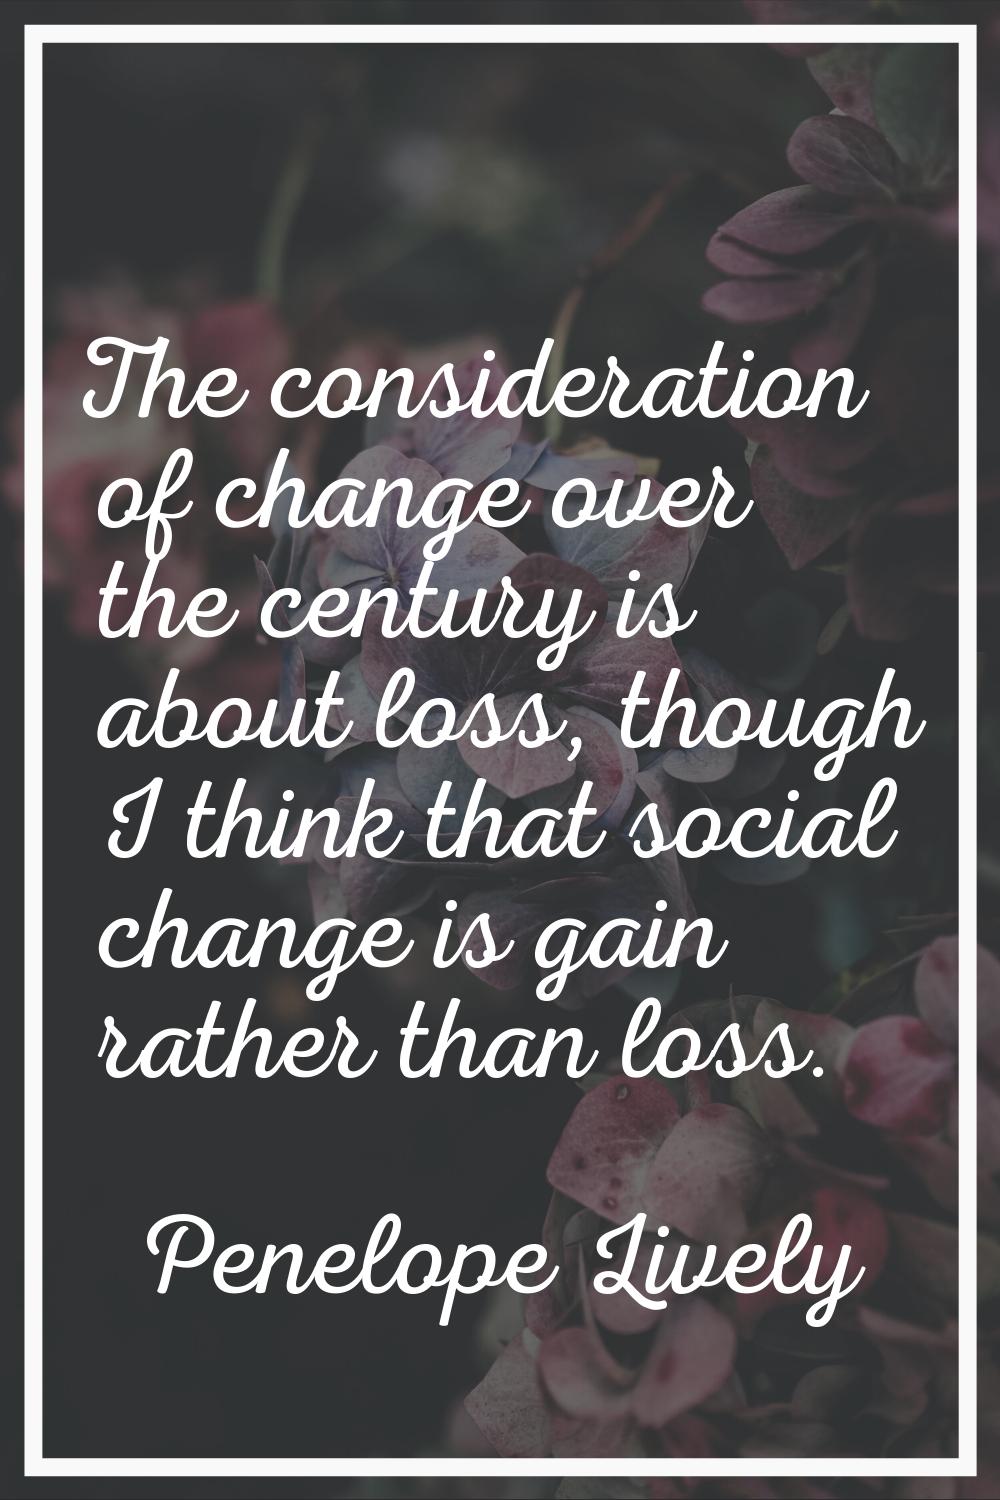 The consideration of change over the century is about loss, though I think that social change is ga